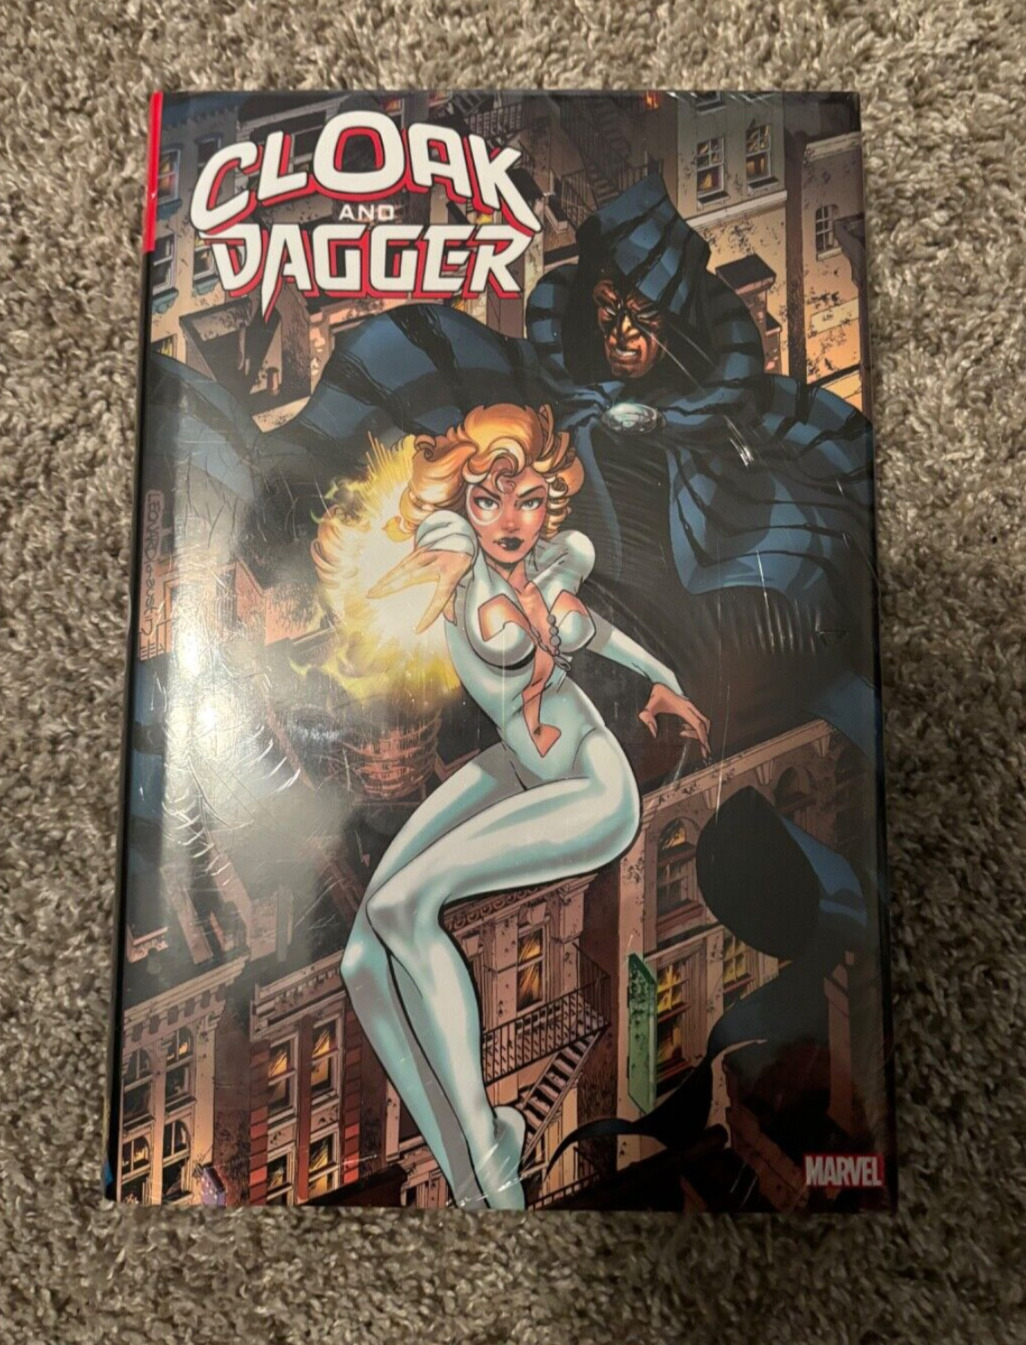 Cloak And Dagger Omnibus Vol 1 - 1st edition cover OOP SEALED